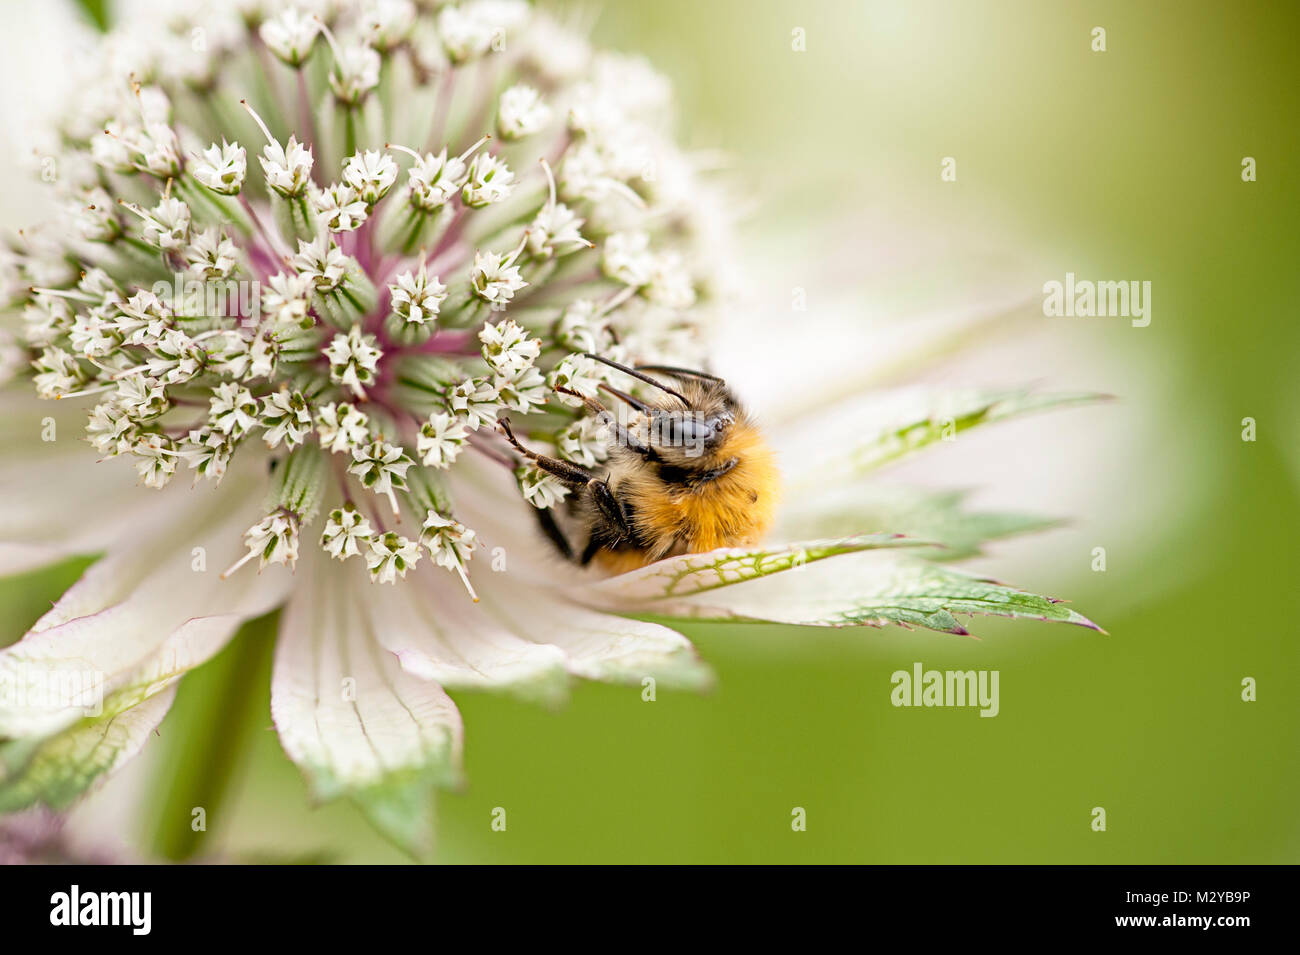 Close-up image of a Honey bee Pollinating a summer, White Astrantia flower head, also known as Masterwort Stock Photo